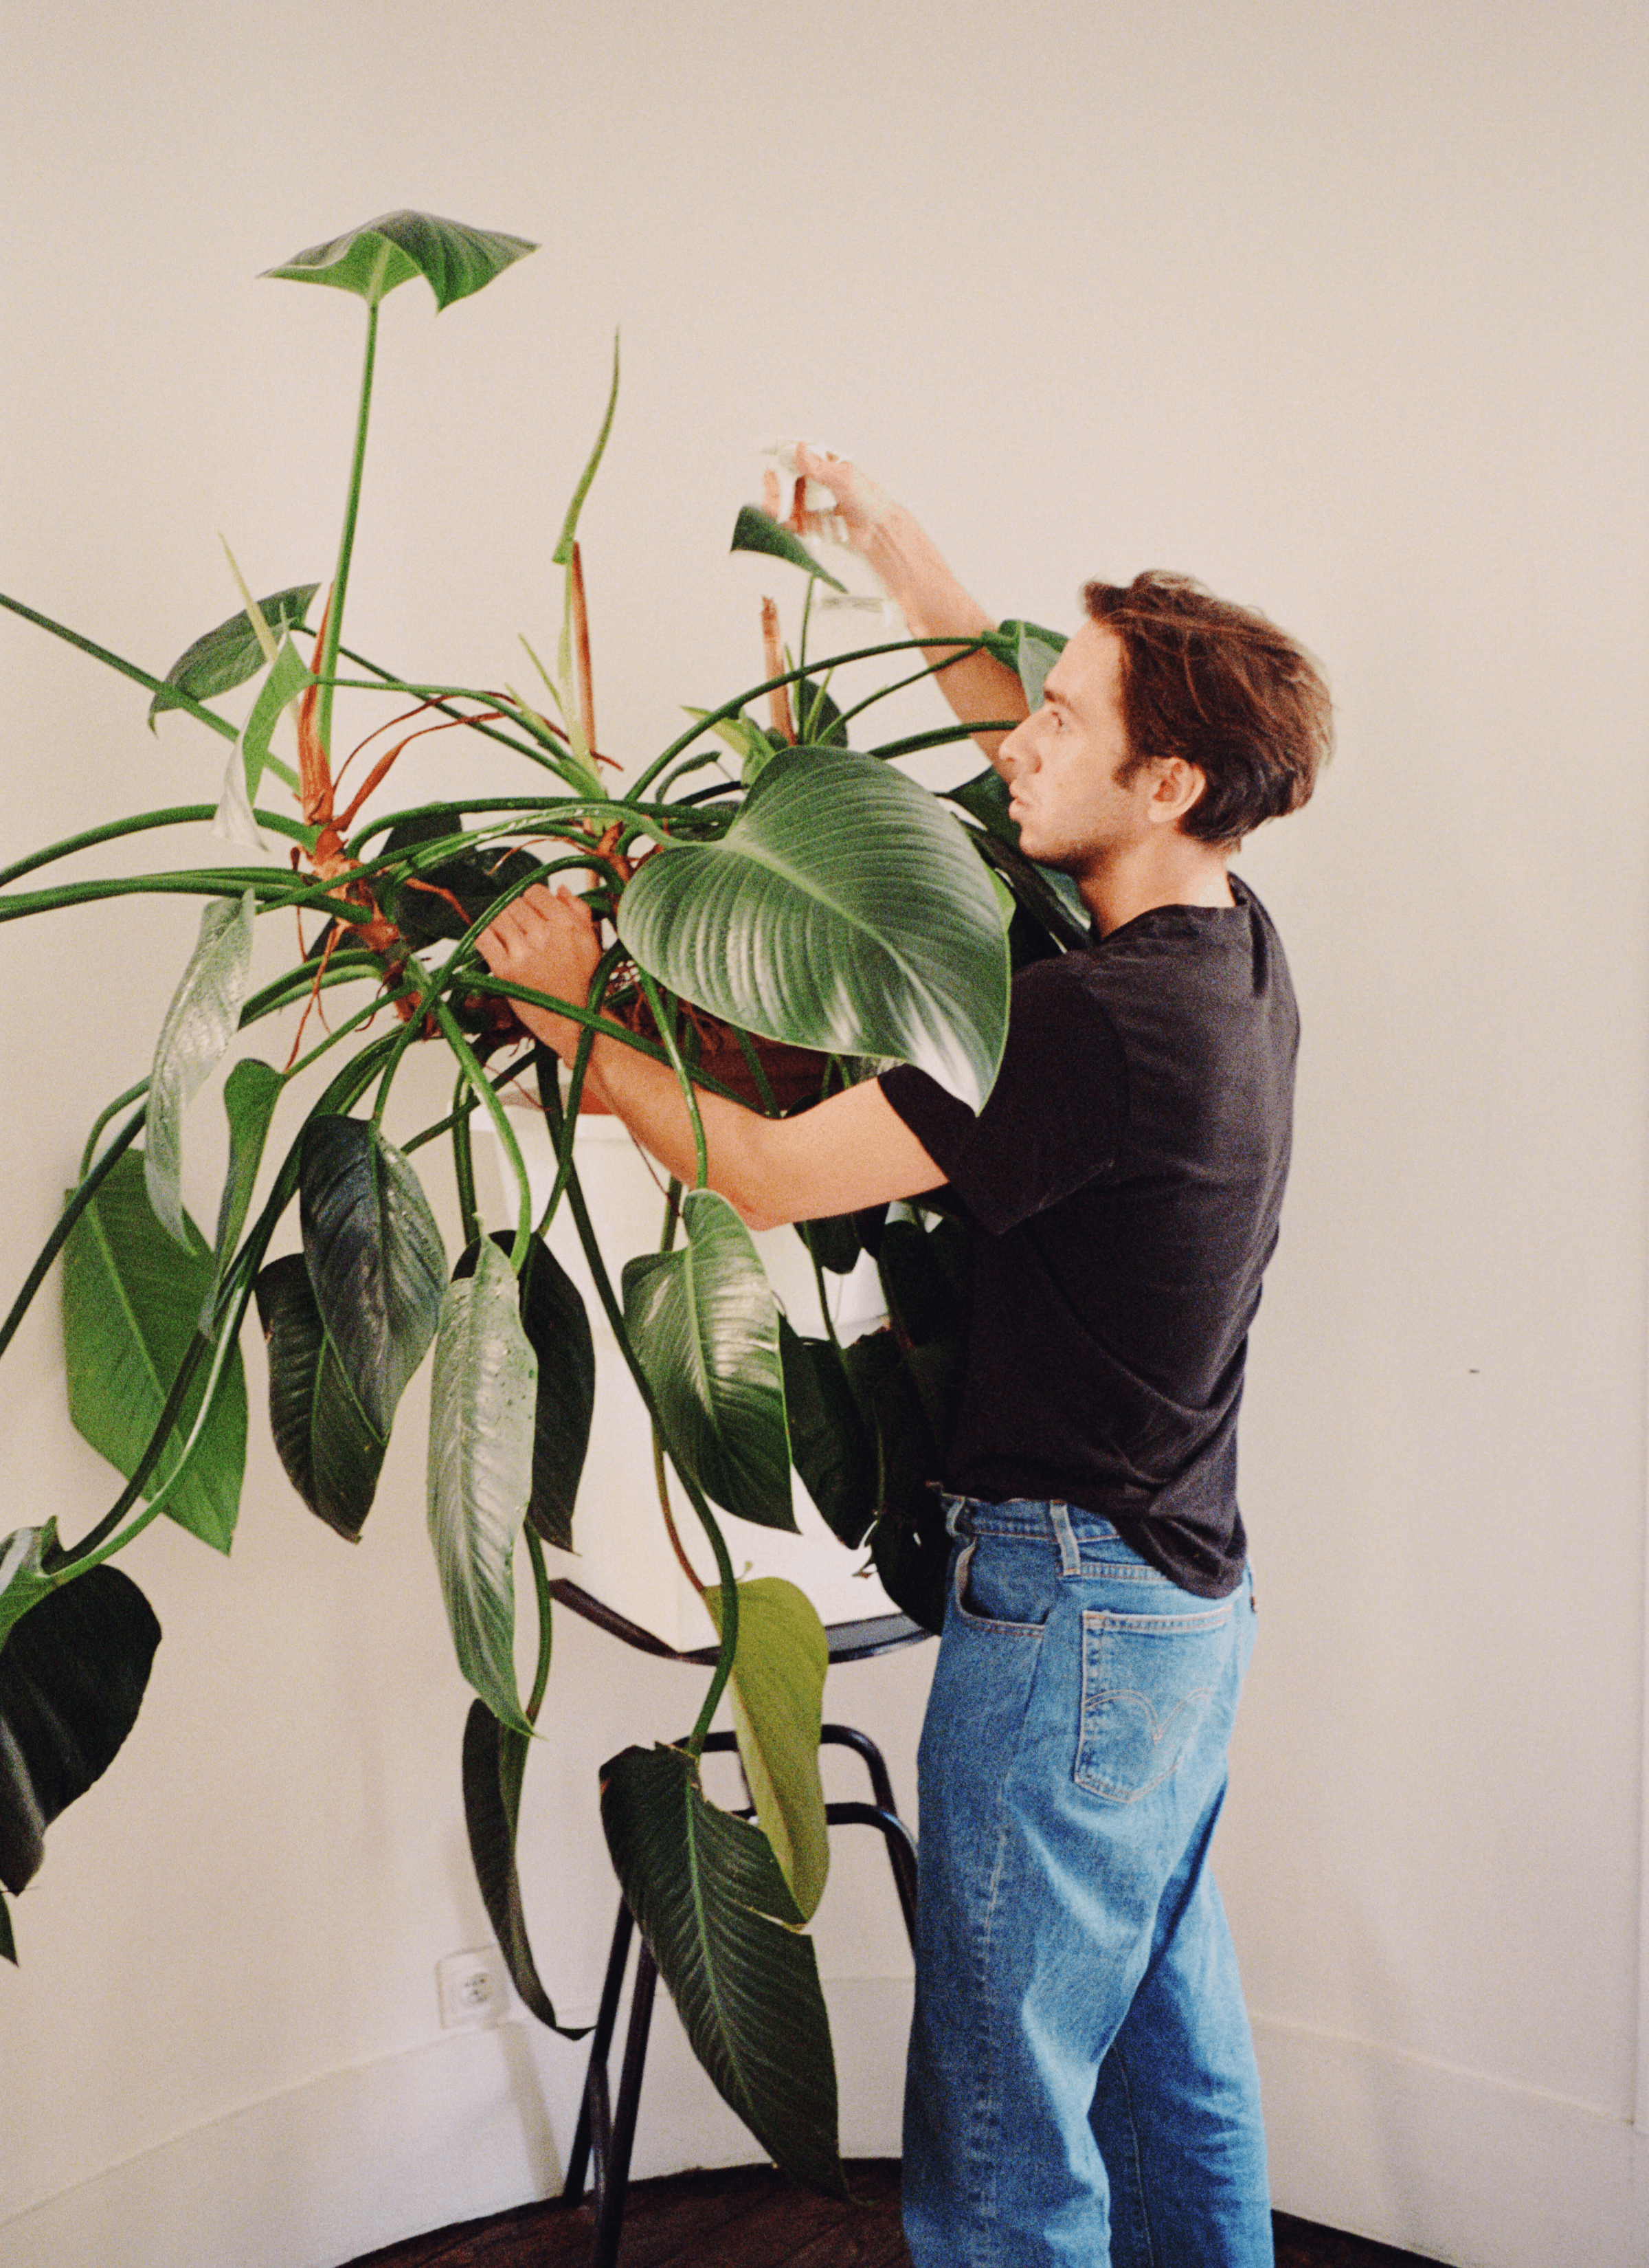 Toni wears a black t-shirt with blue jeans while making adjustment with the Philodendron erubescens, the potted plant.